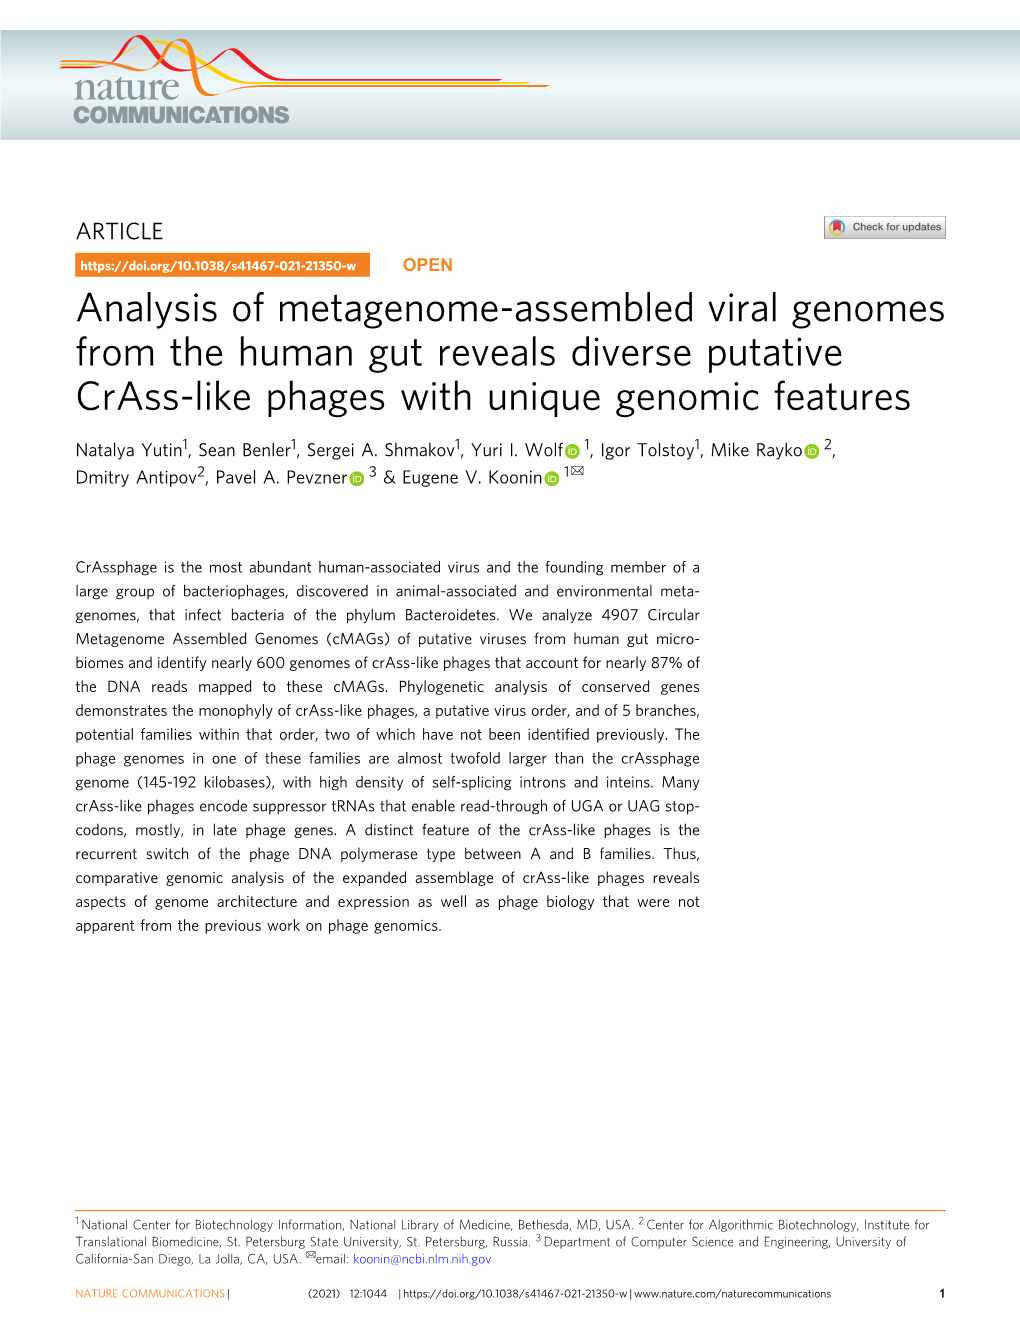 Analysis of Metagenome-Assembled Viral Genomes from the Human Gut Reveals Diverse Putative Crass-Like Phages with Unique Genomic Features